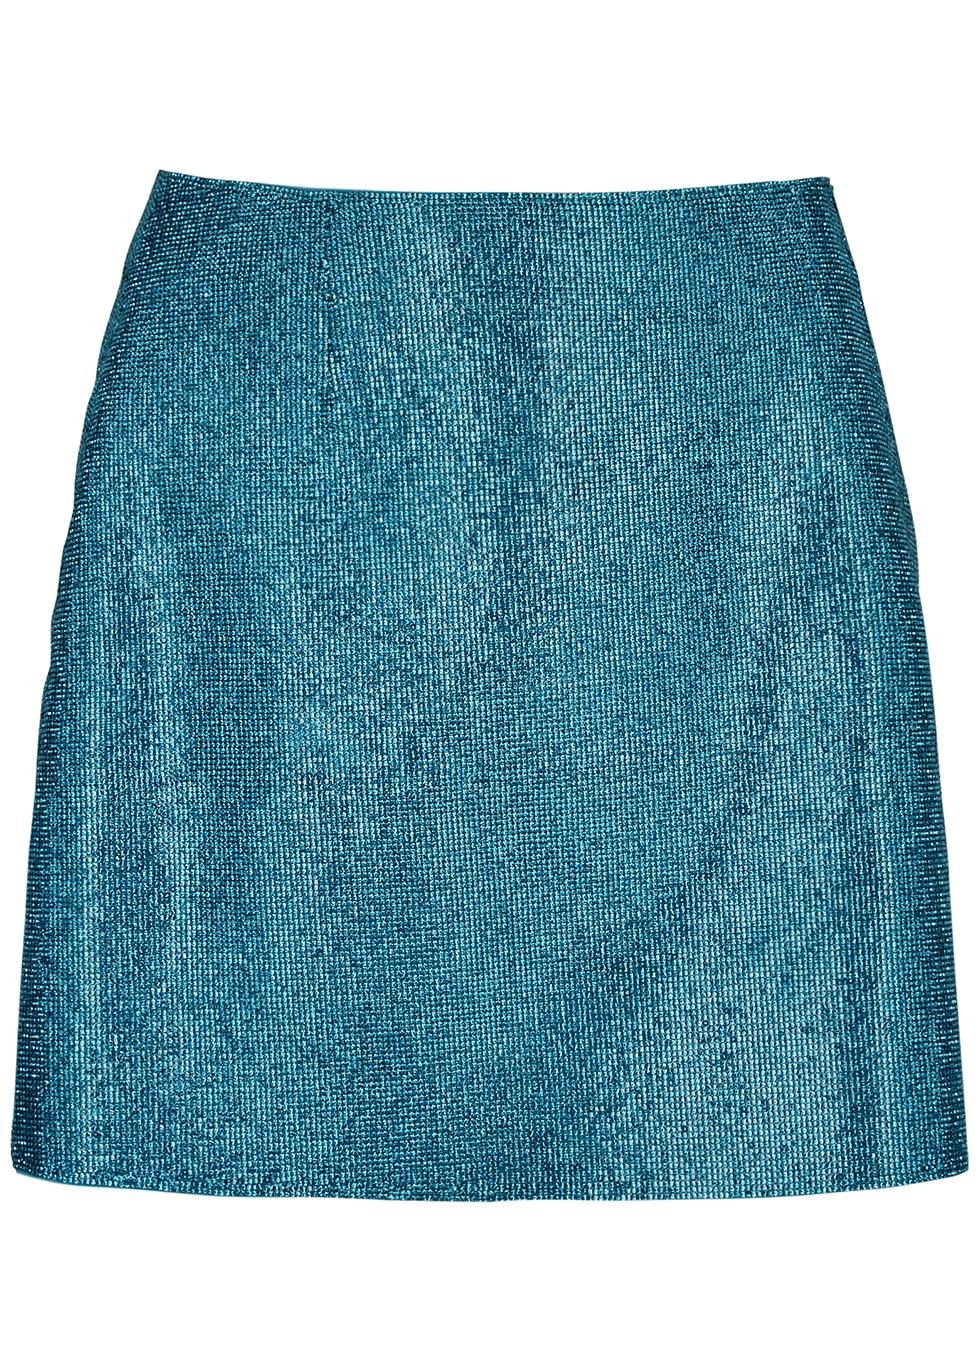 Nue Studio Camille Crystal Mini Skirt in Blue | Lyst